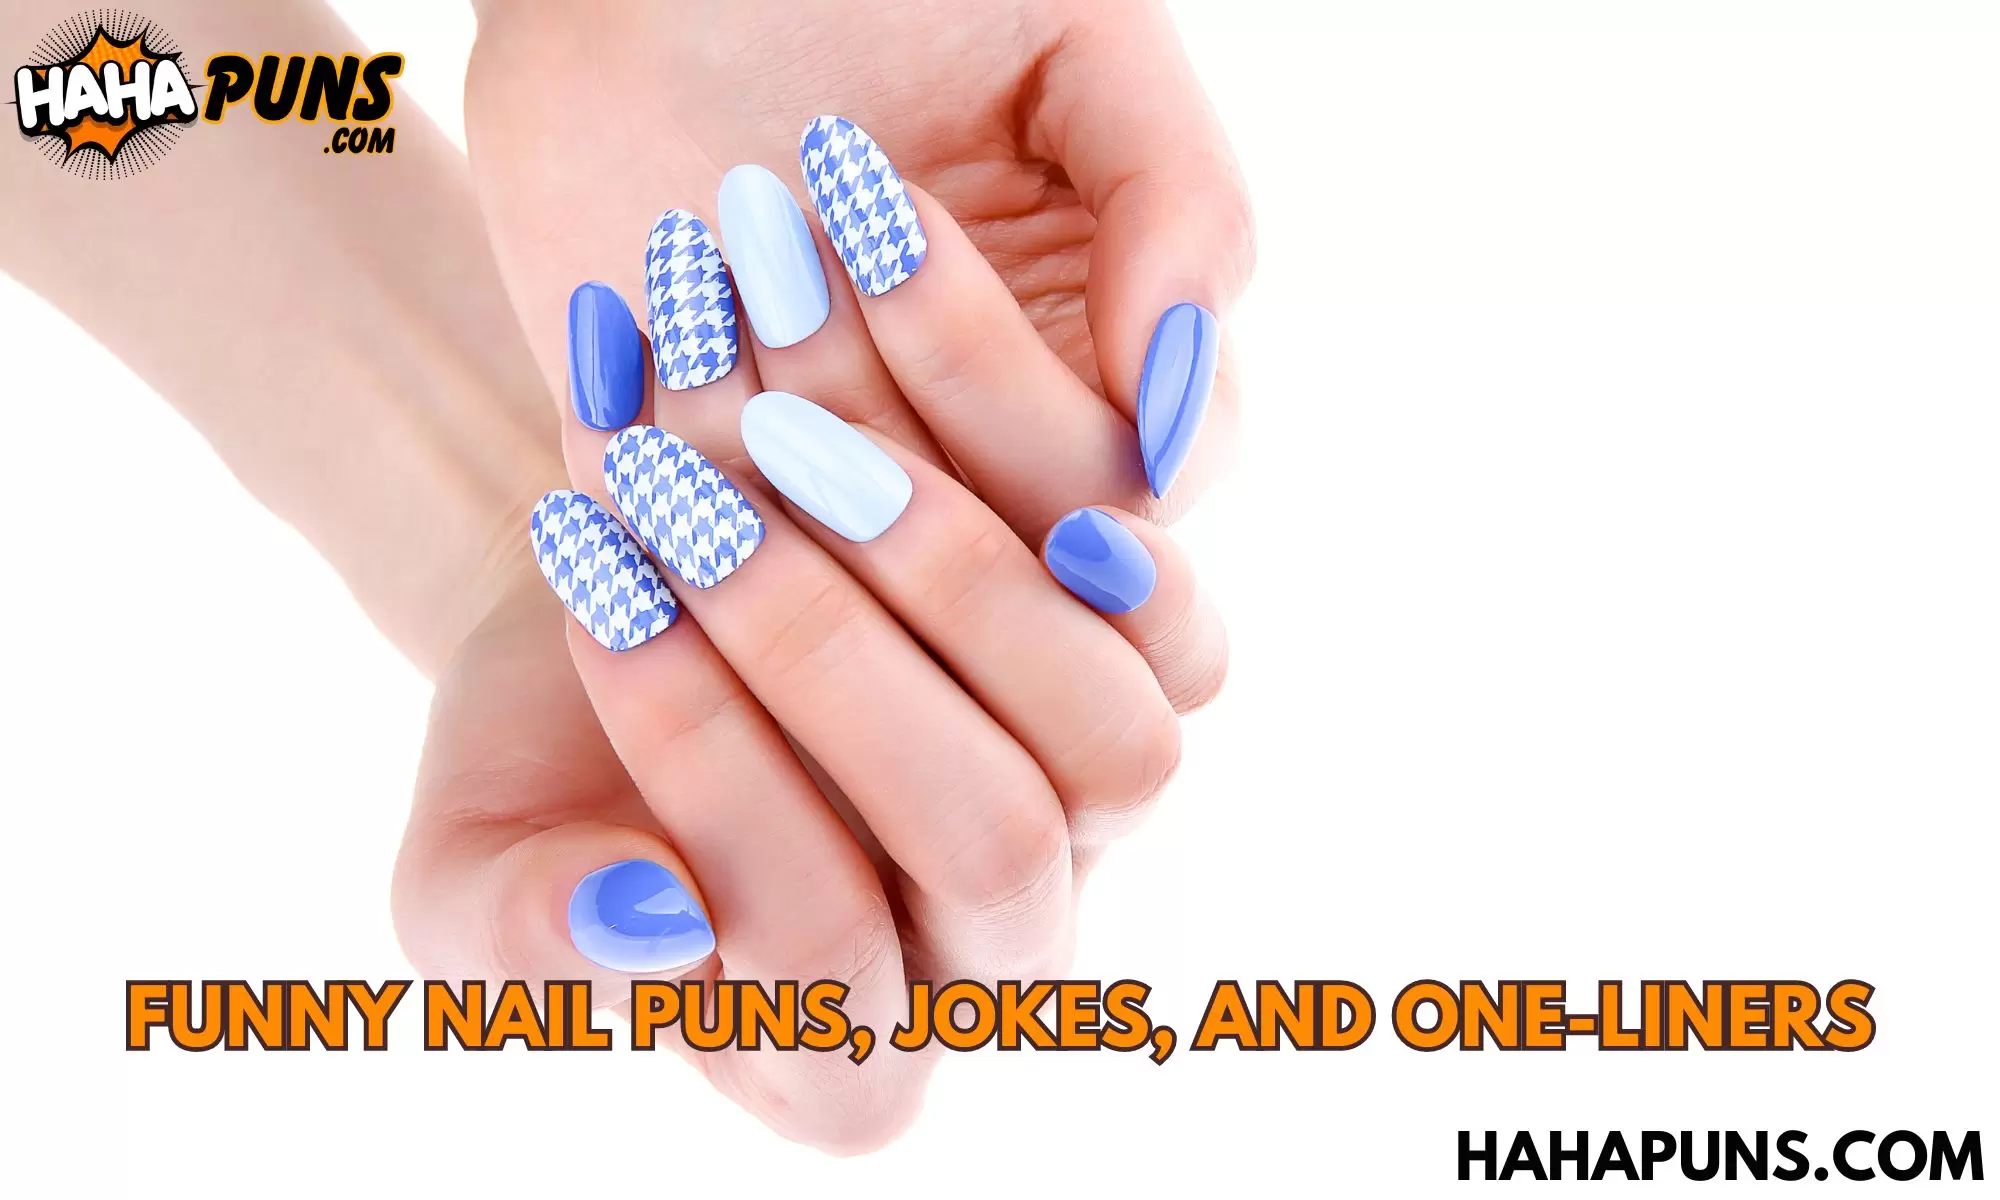 Funny Nail Puns, Jokes, And One-Liners